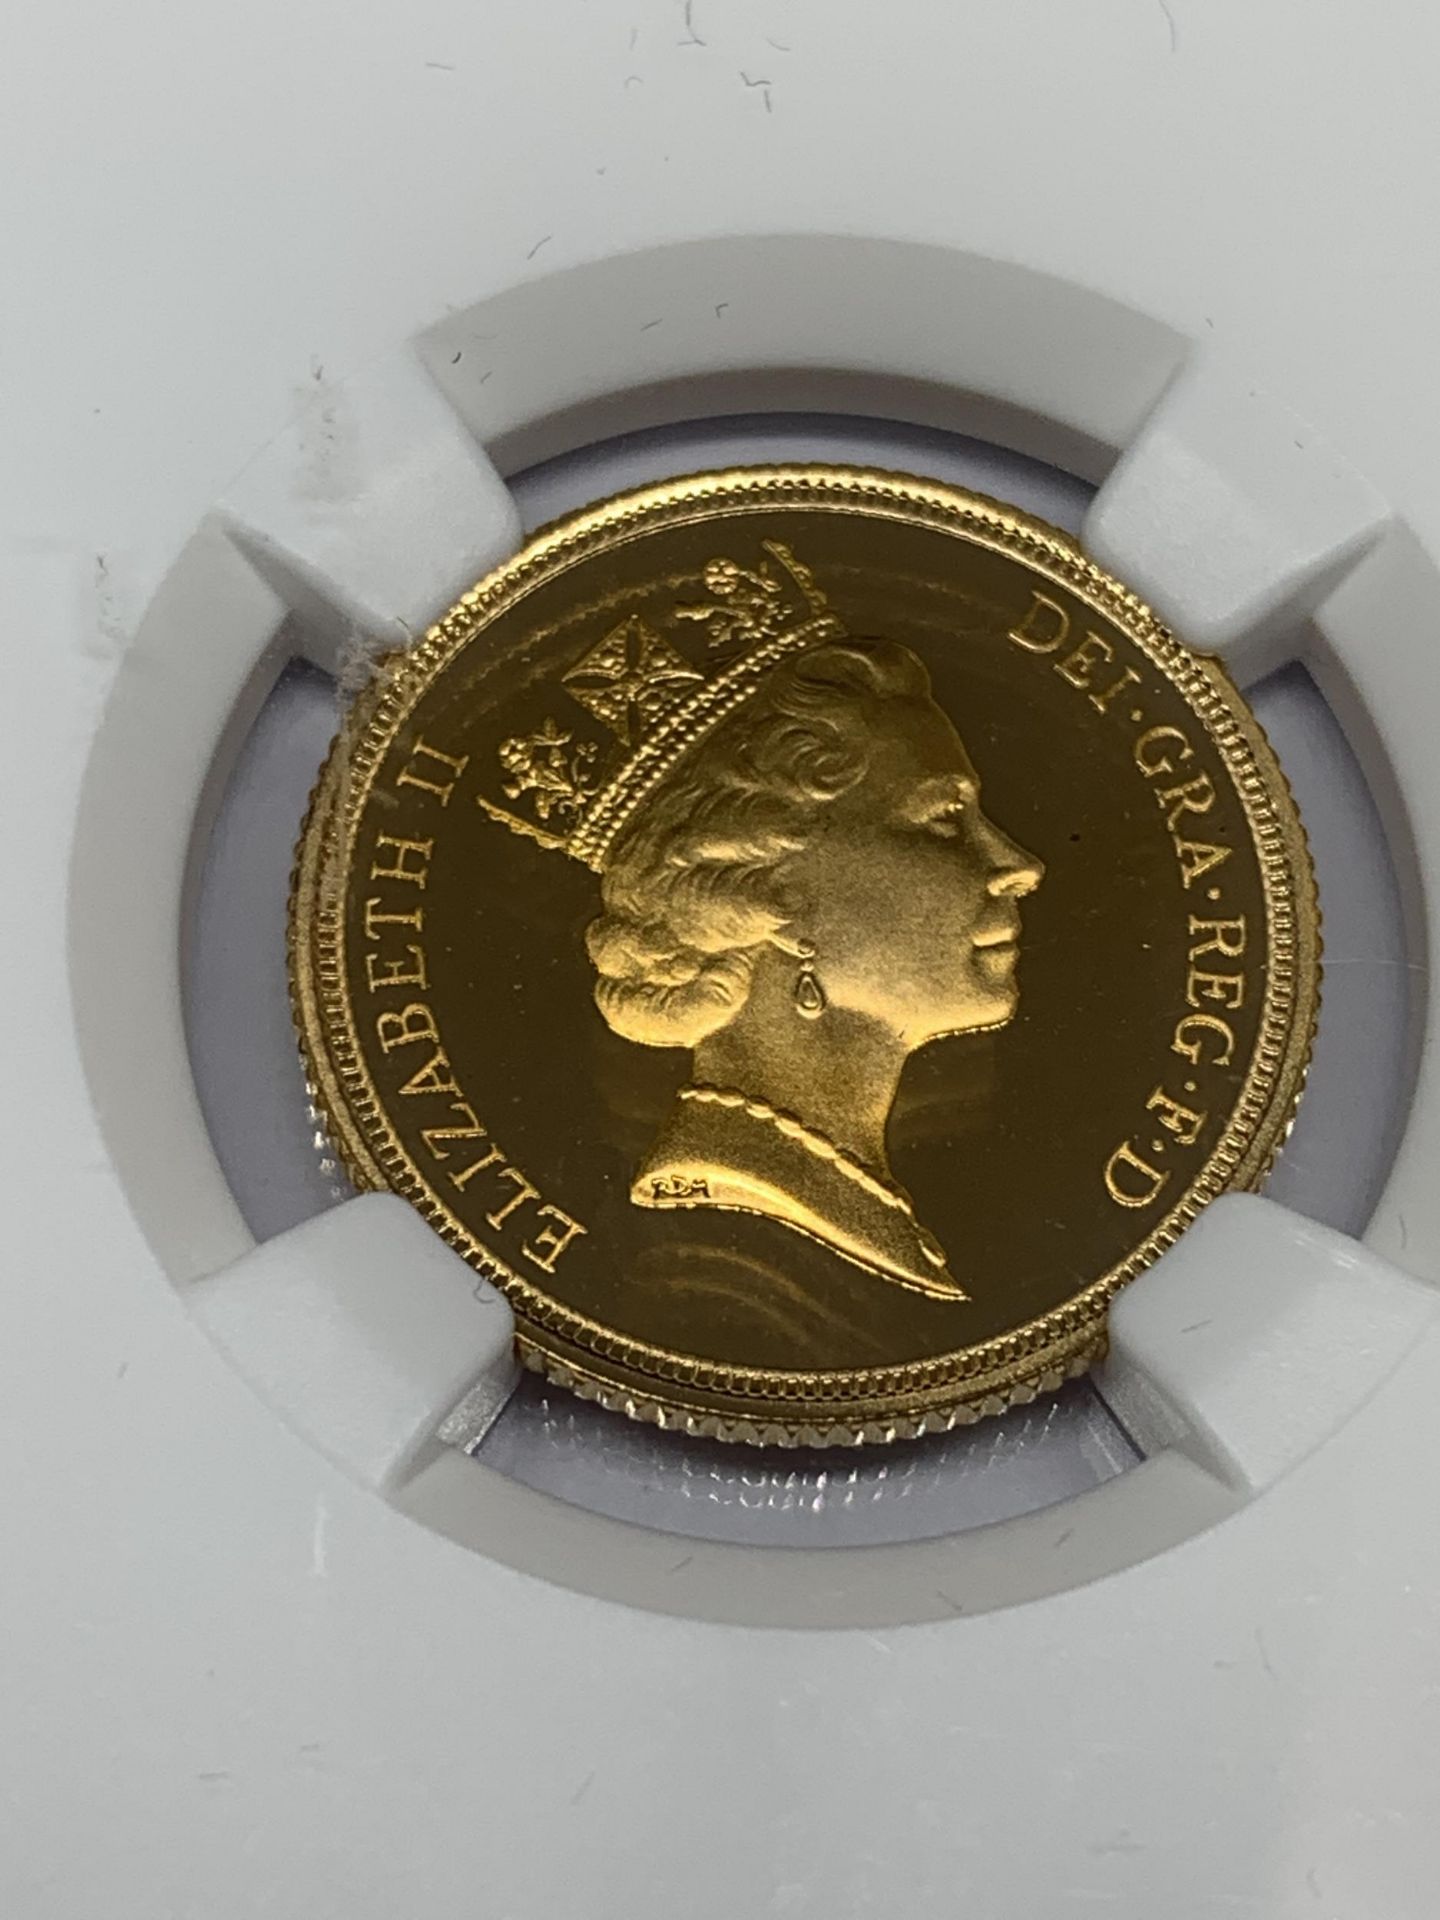 A PROOF 1993 GOLD SOVEREIGN QUEEN ELIZABETH II LONDON MINT IN A SEALED NGC CASE - Bild 2 aus 4